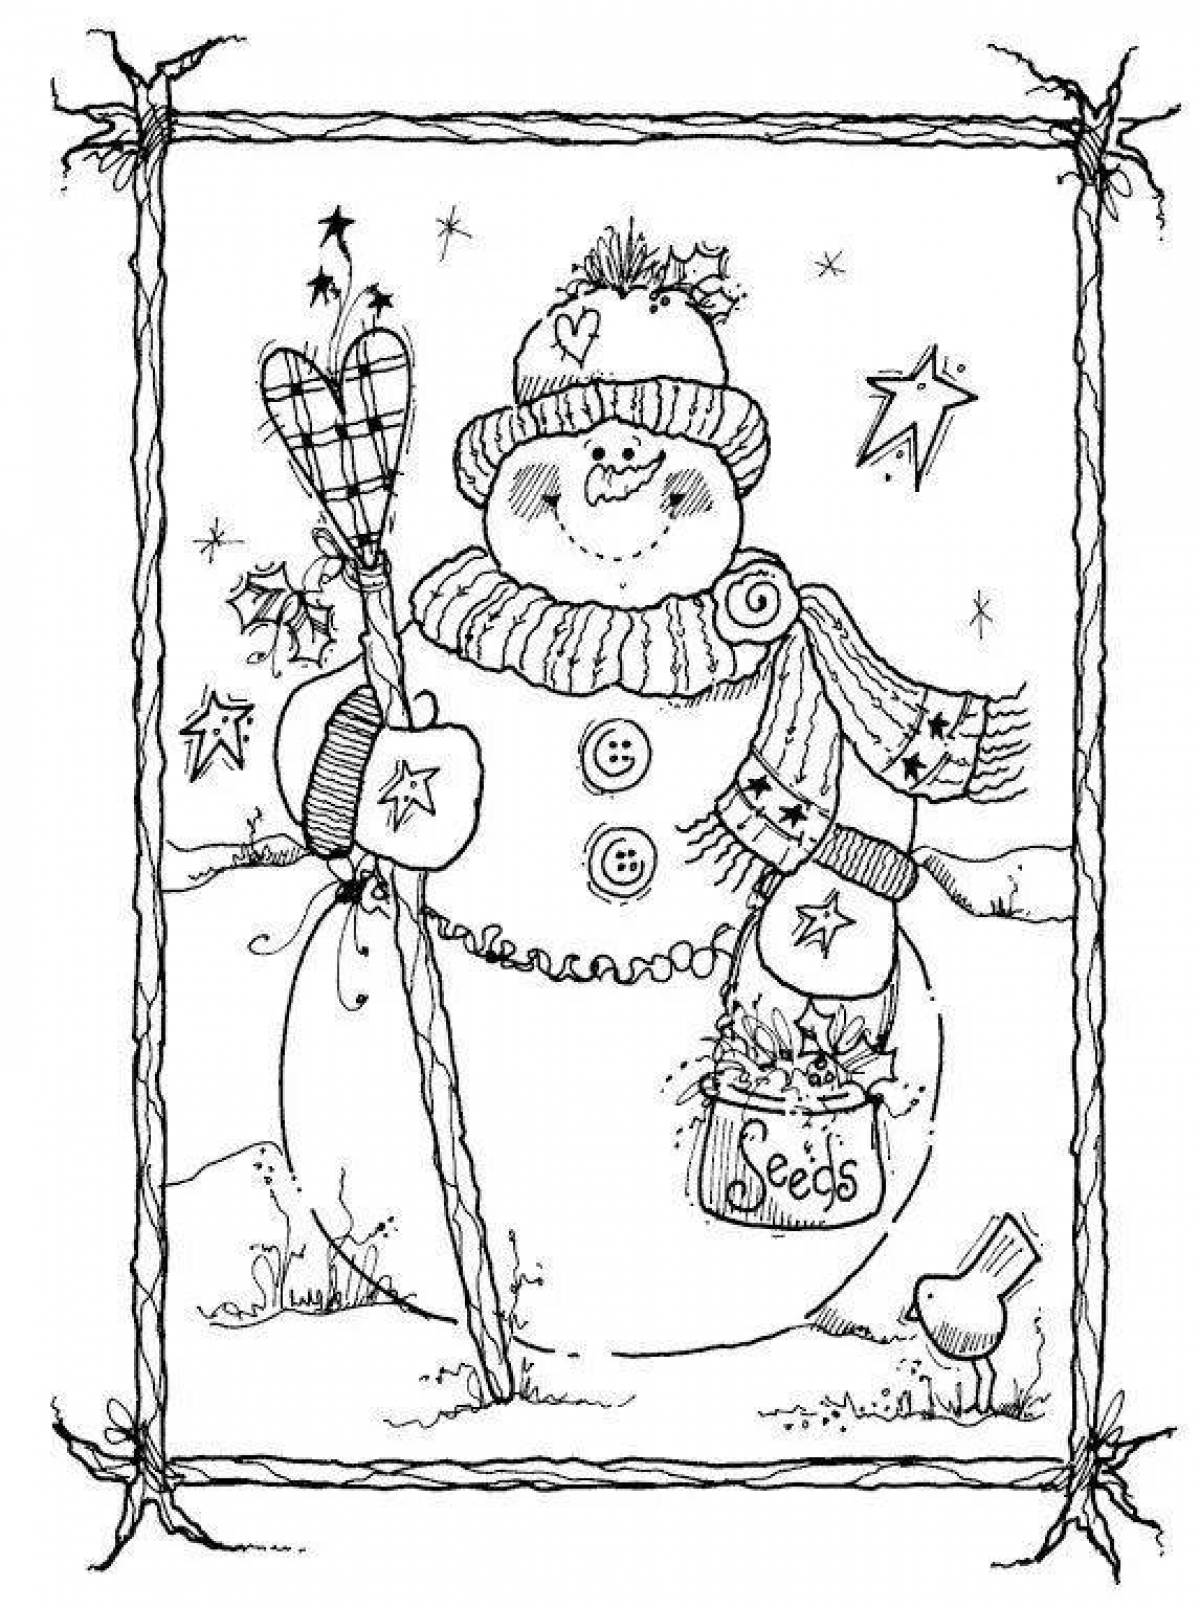 Amazing snowman antistress coloring book